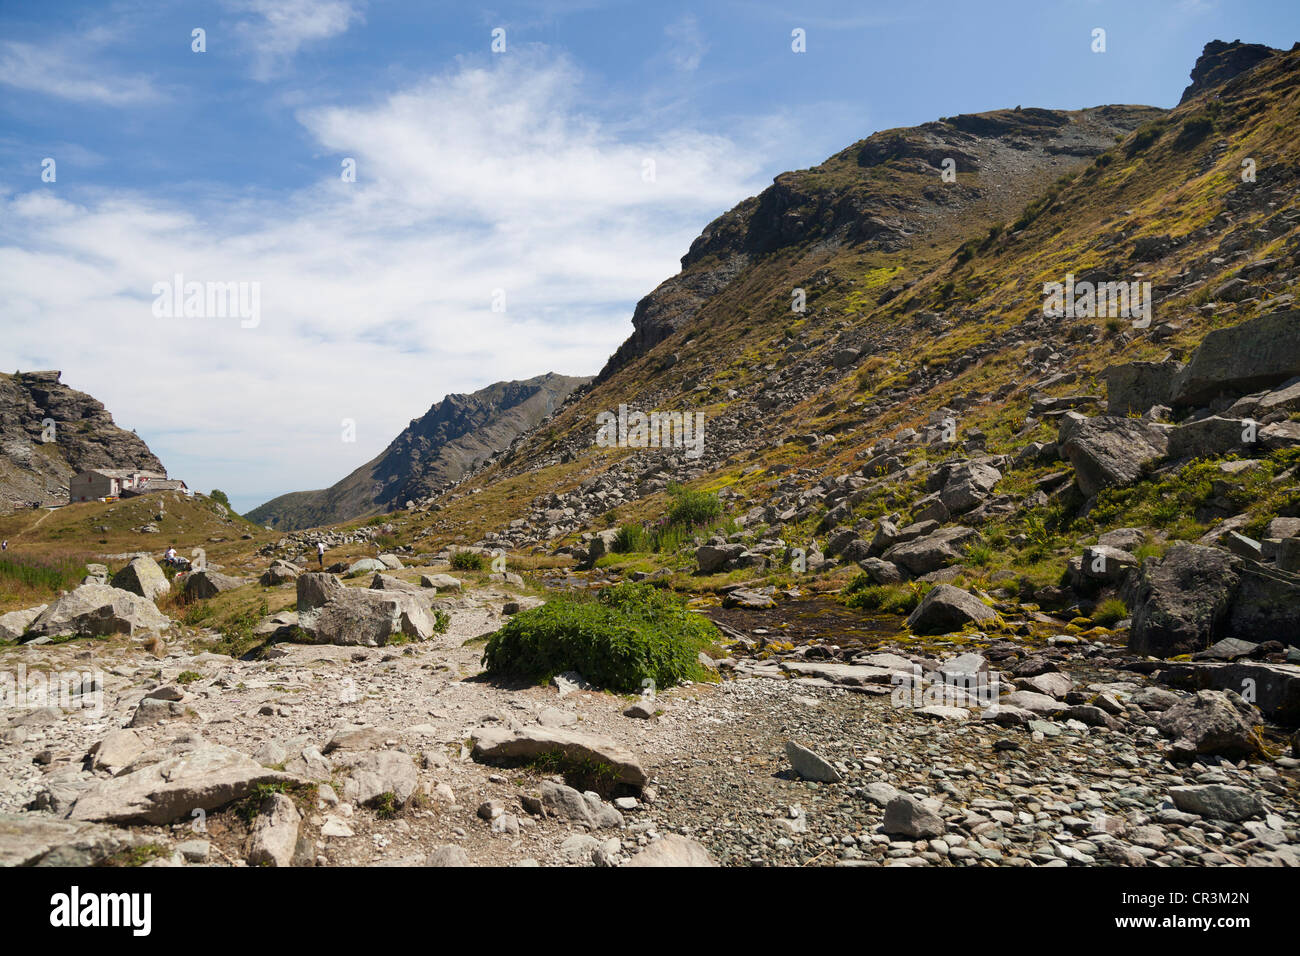 On the Pian del Re, high plateau, source of the Po River, Cottian Alps, Cuneo, Piedmont, Italy, Europev Stock Photo